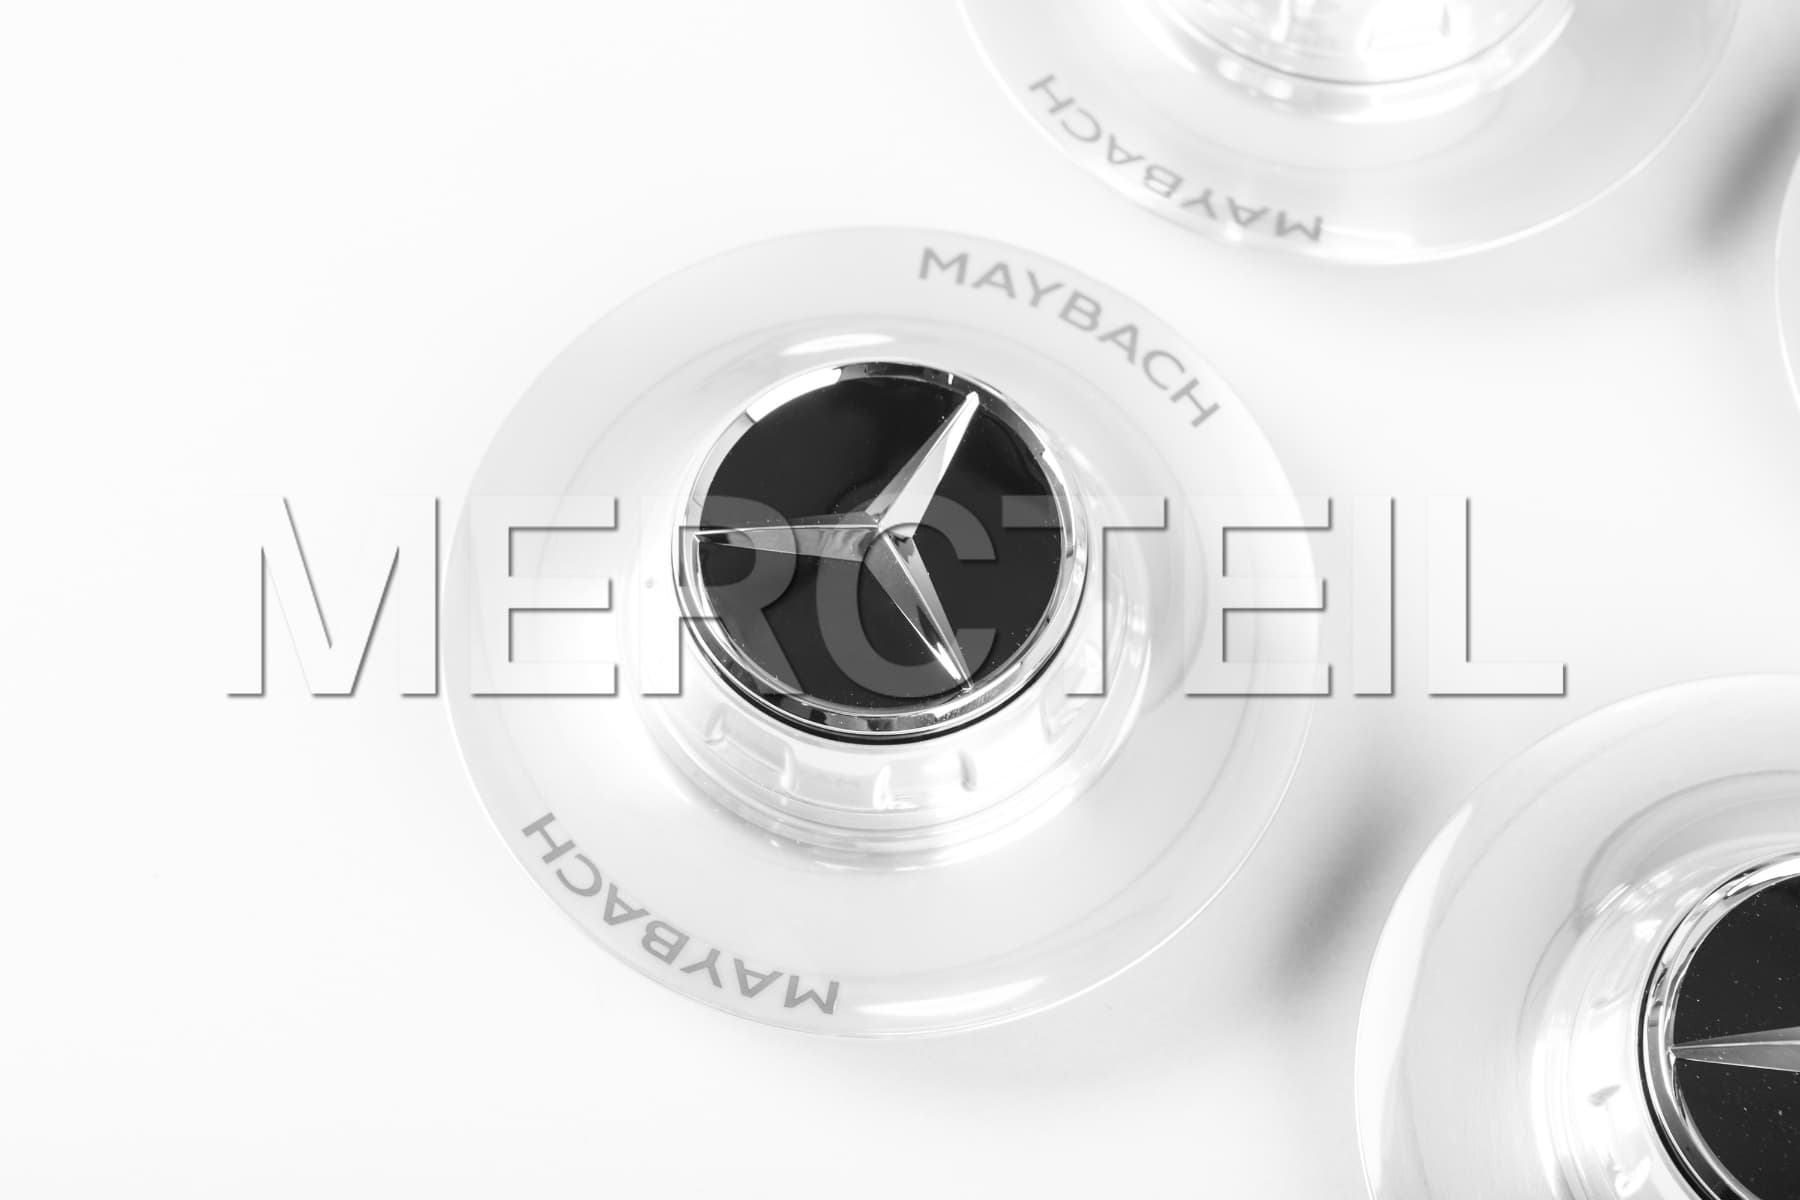 S Class Maybach Alloy Wheel Hubcaps W223 Genuine Mercedes Benz (Part number: A22340006007X15)